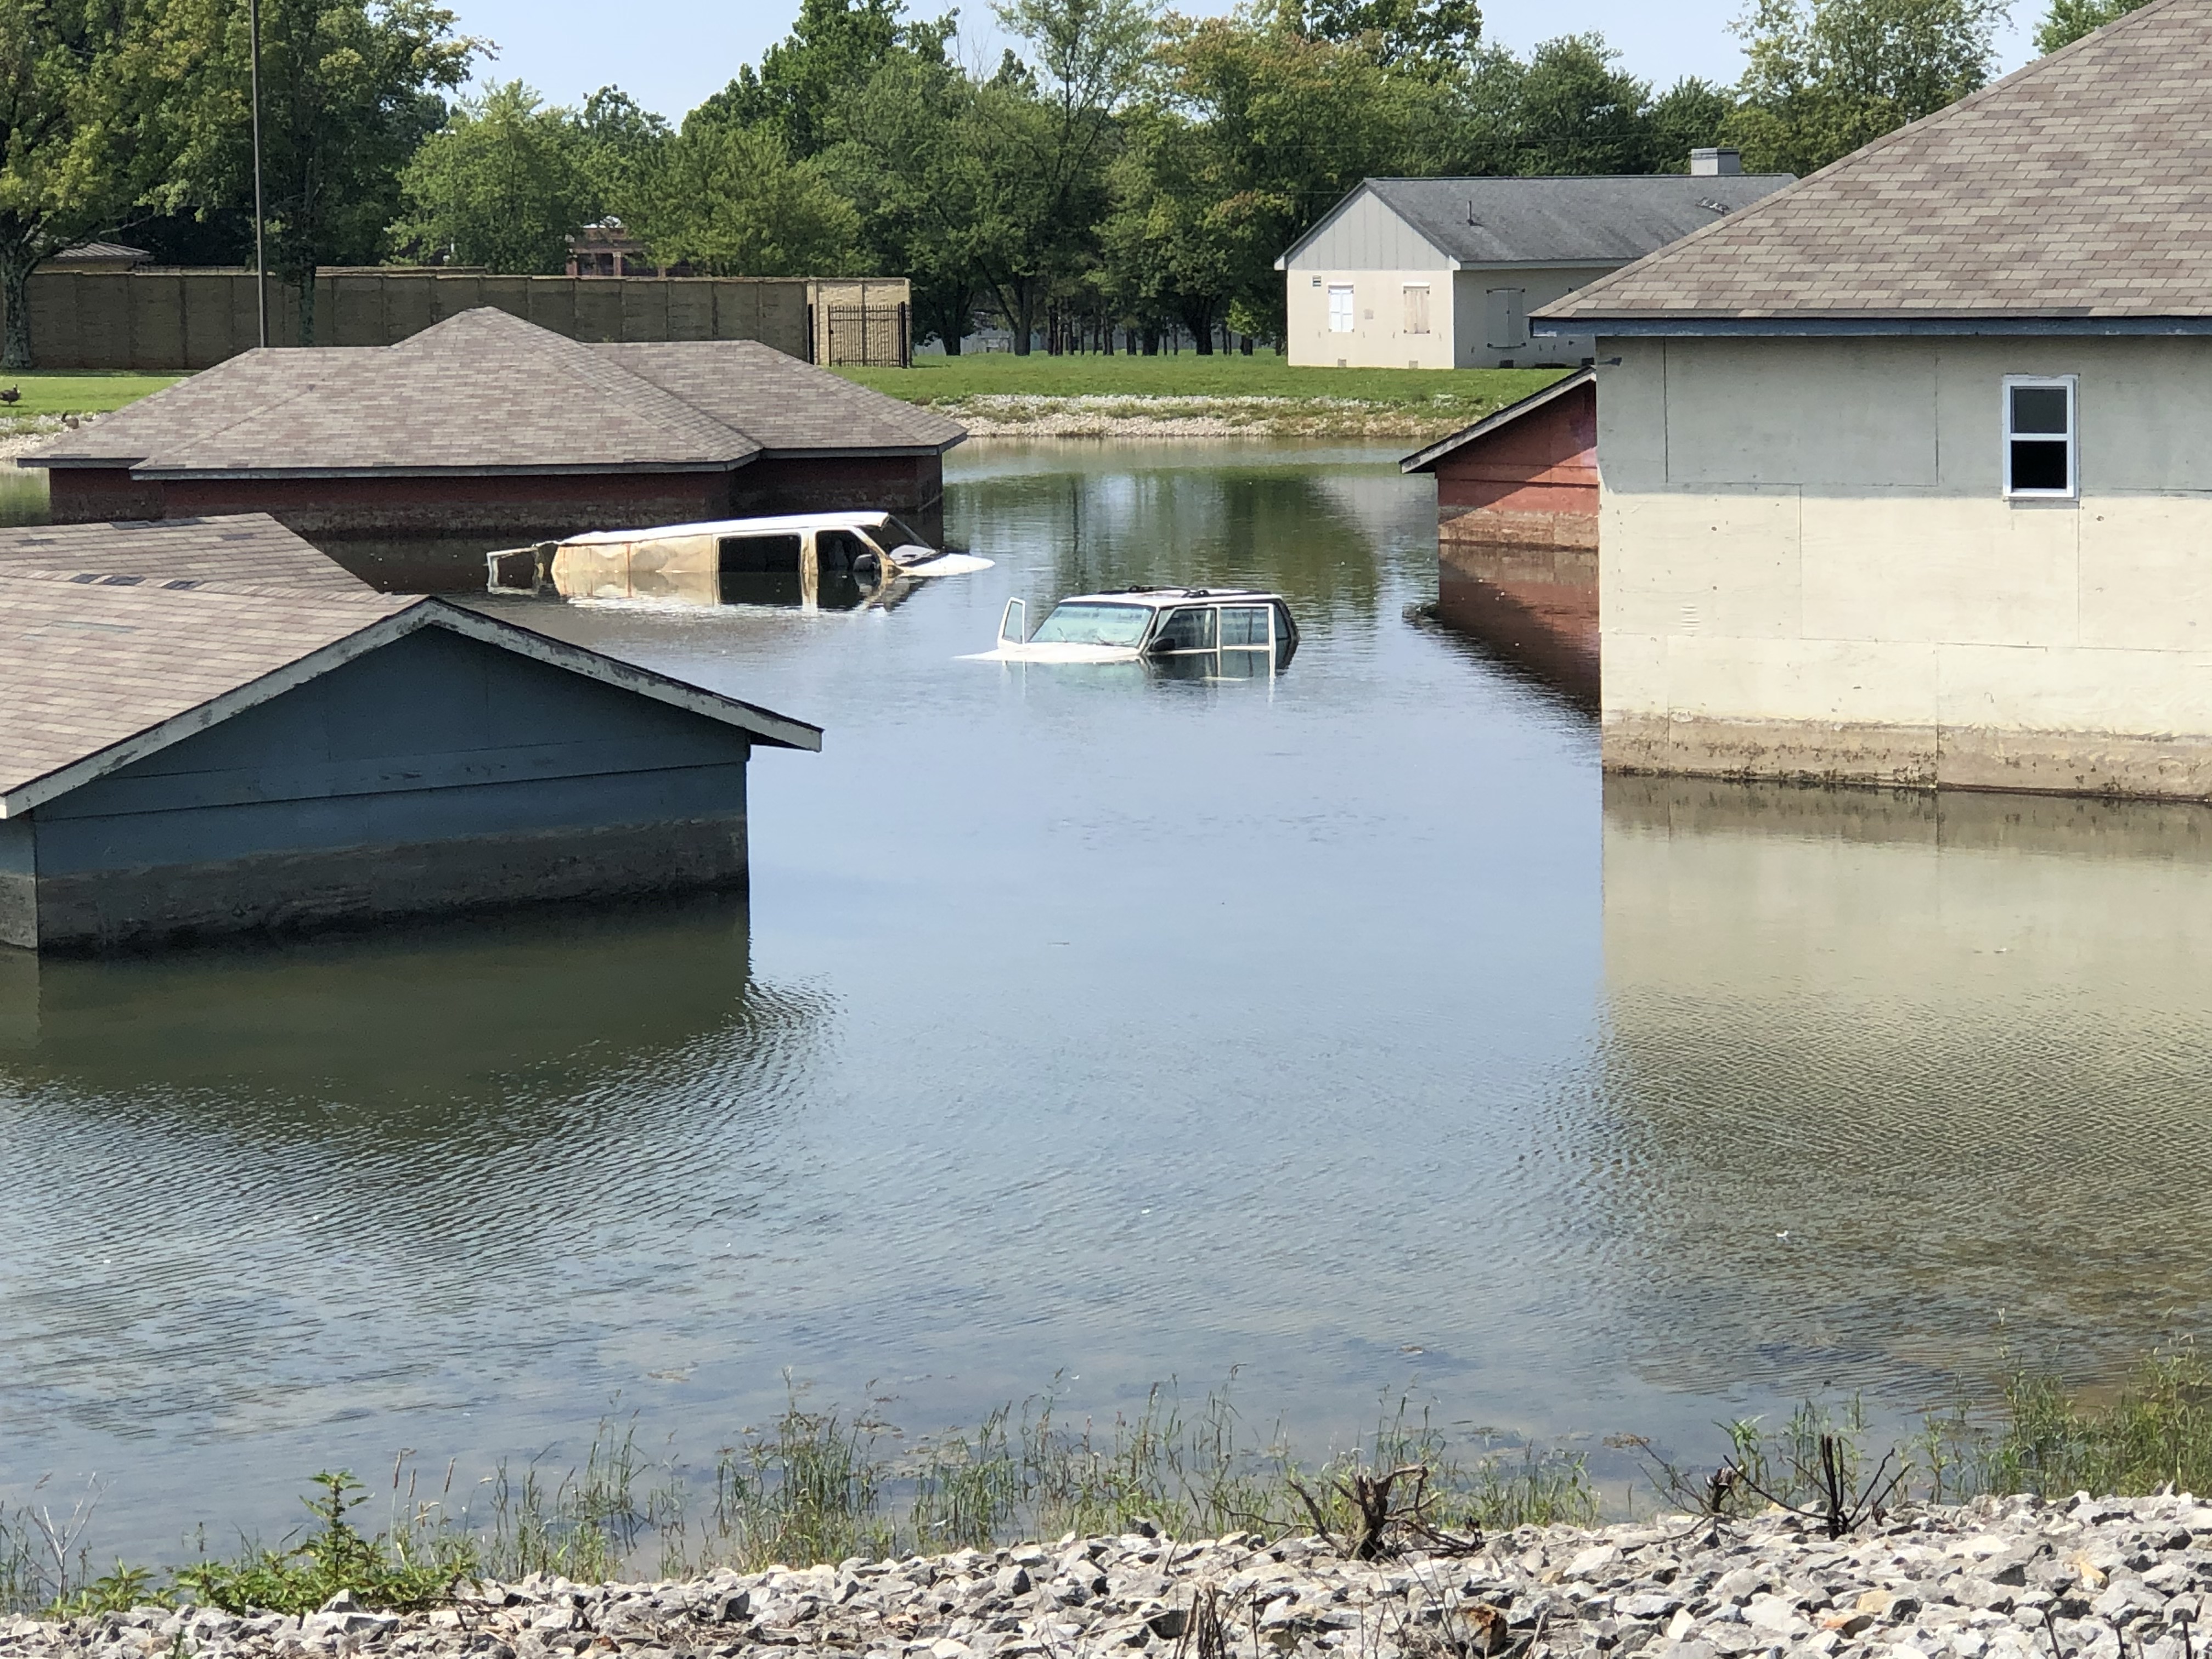 BUTLERVILLE, IN - A glimpse of the flooded town that Coast Guard members walked into early this August. Pictured is the Muscatatuck Urban Training Center (MUTC)’s flooded village, which includes flooded houses, vehicles, and street signs, awaits members who will use this environment to train for missions such as rescuing survivors from rooftops. 